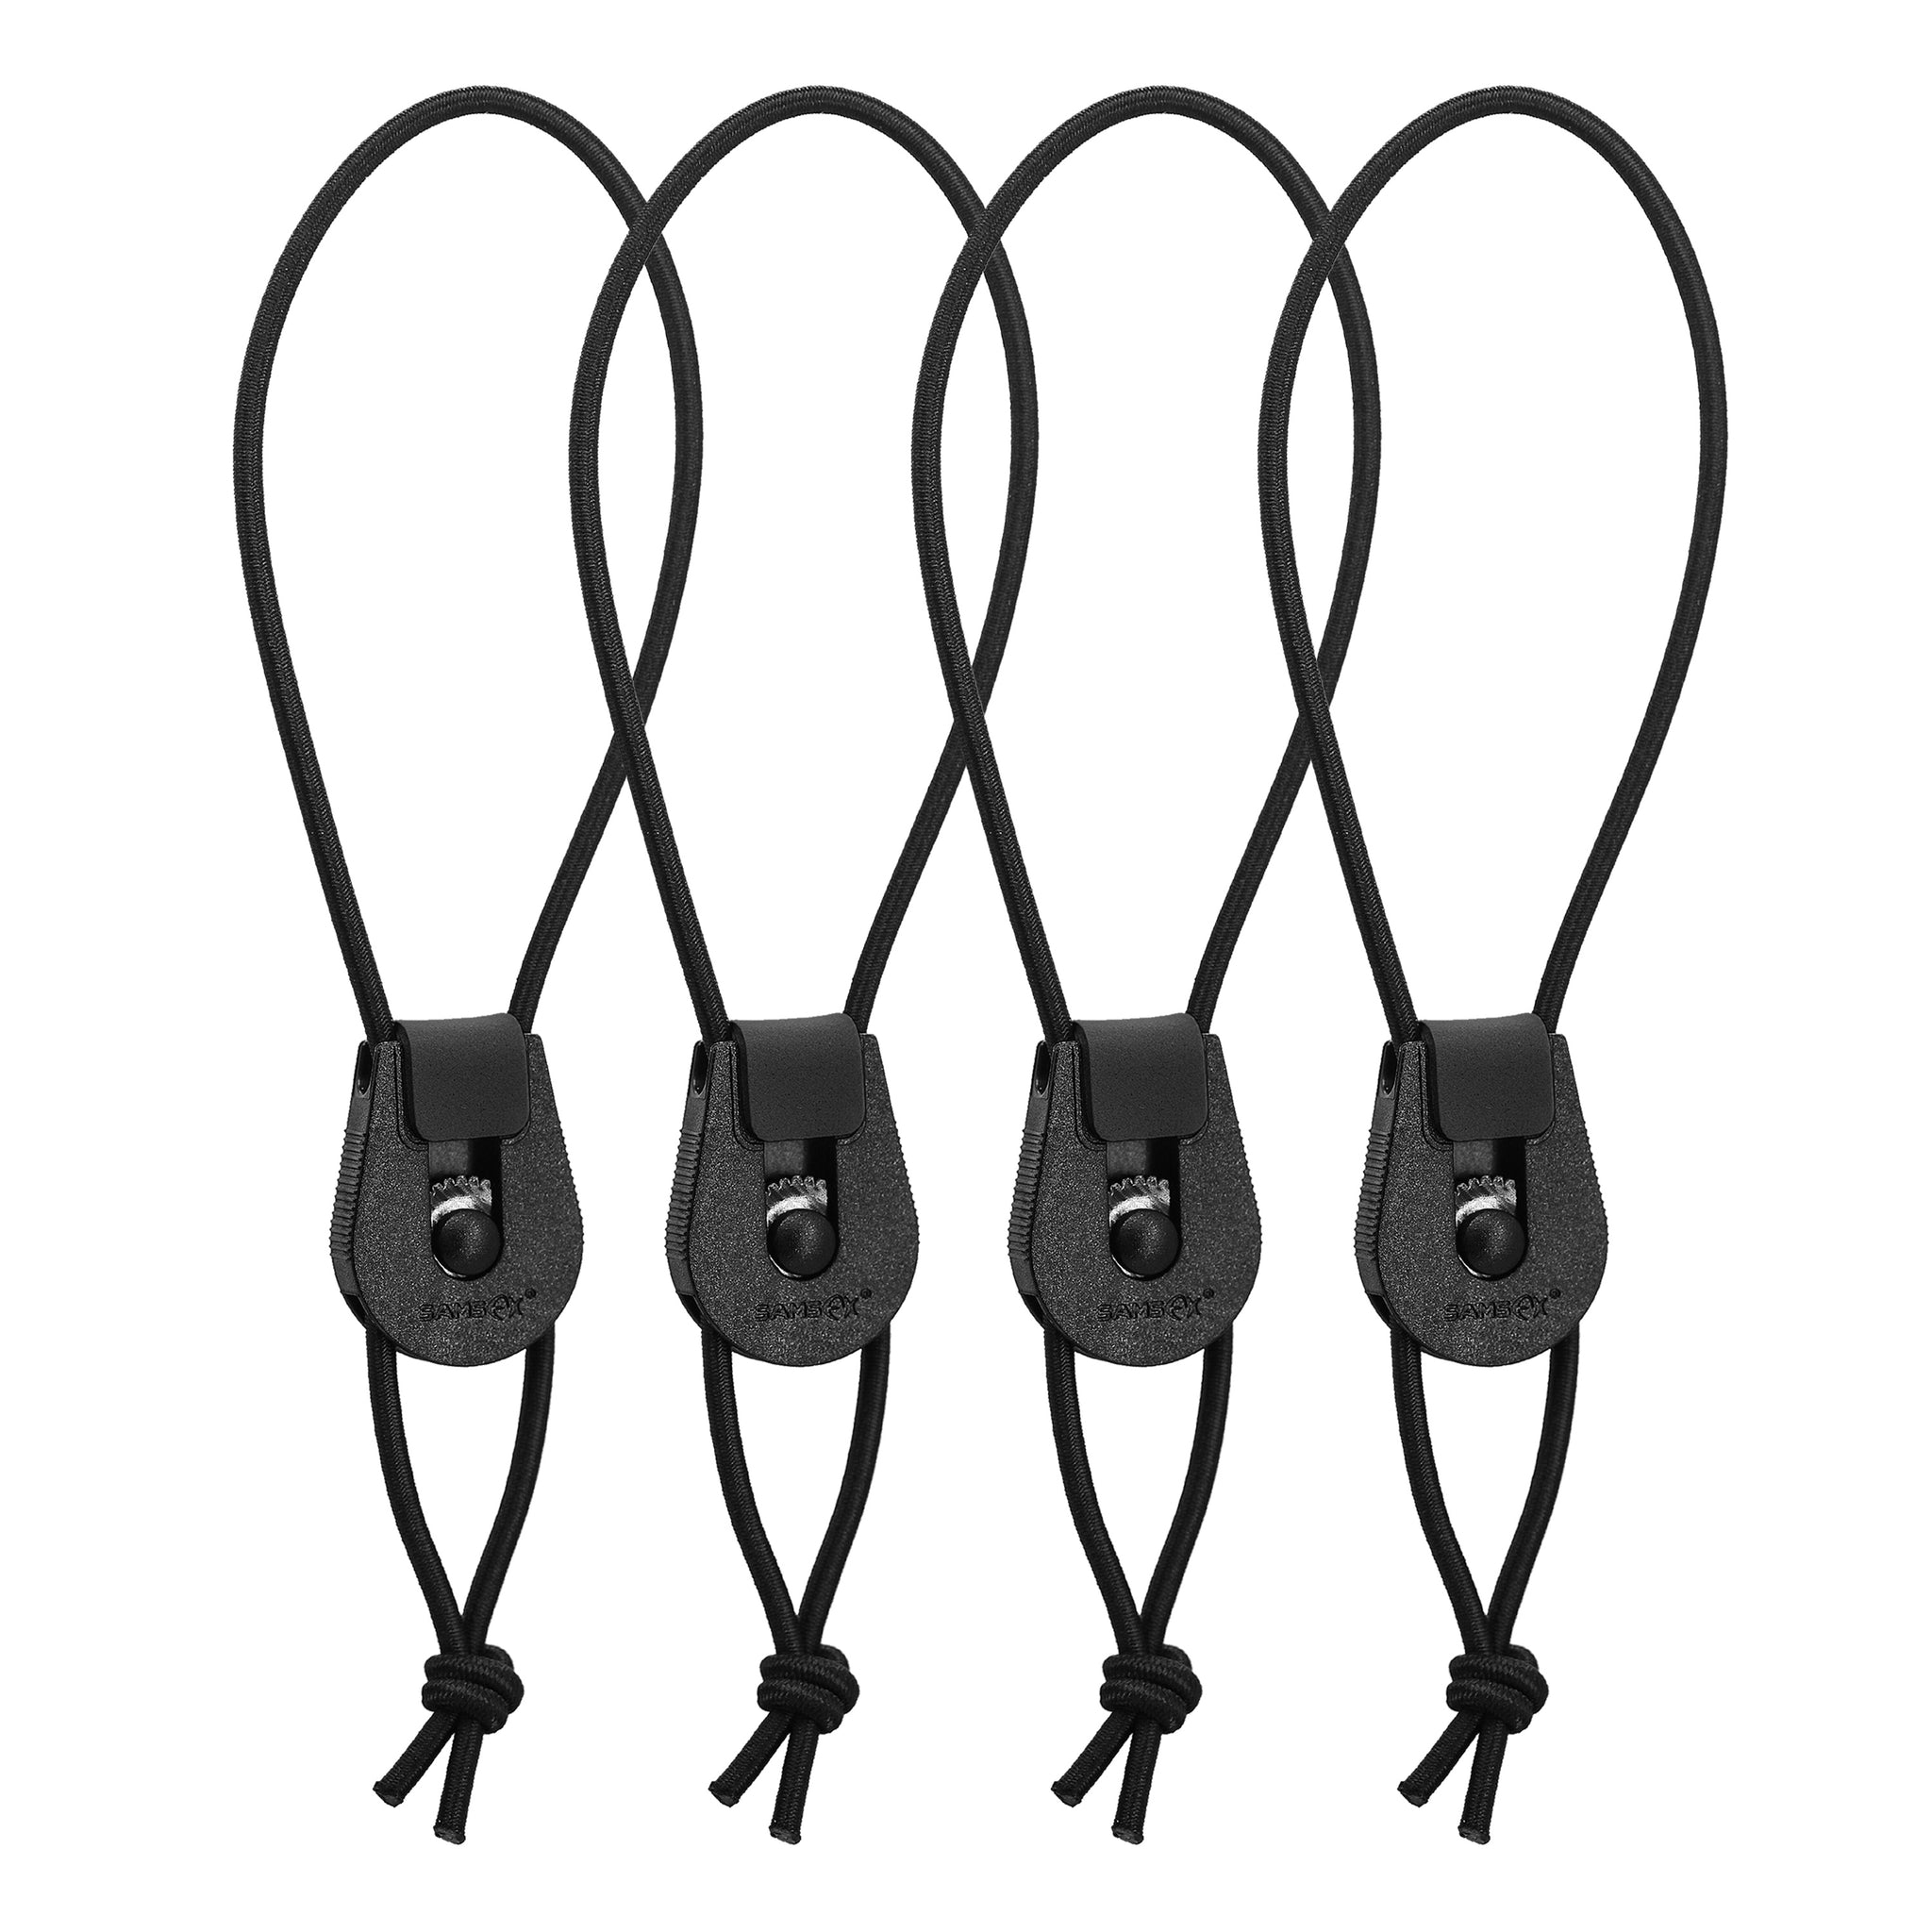 Outdoor Fishing Rod Ties Straps Set Of 5 With Tie Holder, Suspender  Fastener, Hook Loop Ties, Belt, And Wrap Band For Optimal Performance From  Outdoor_market, $1.88